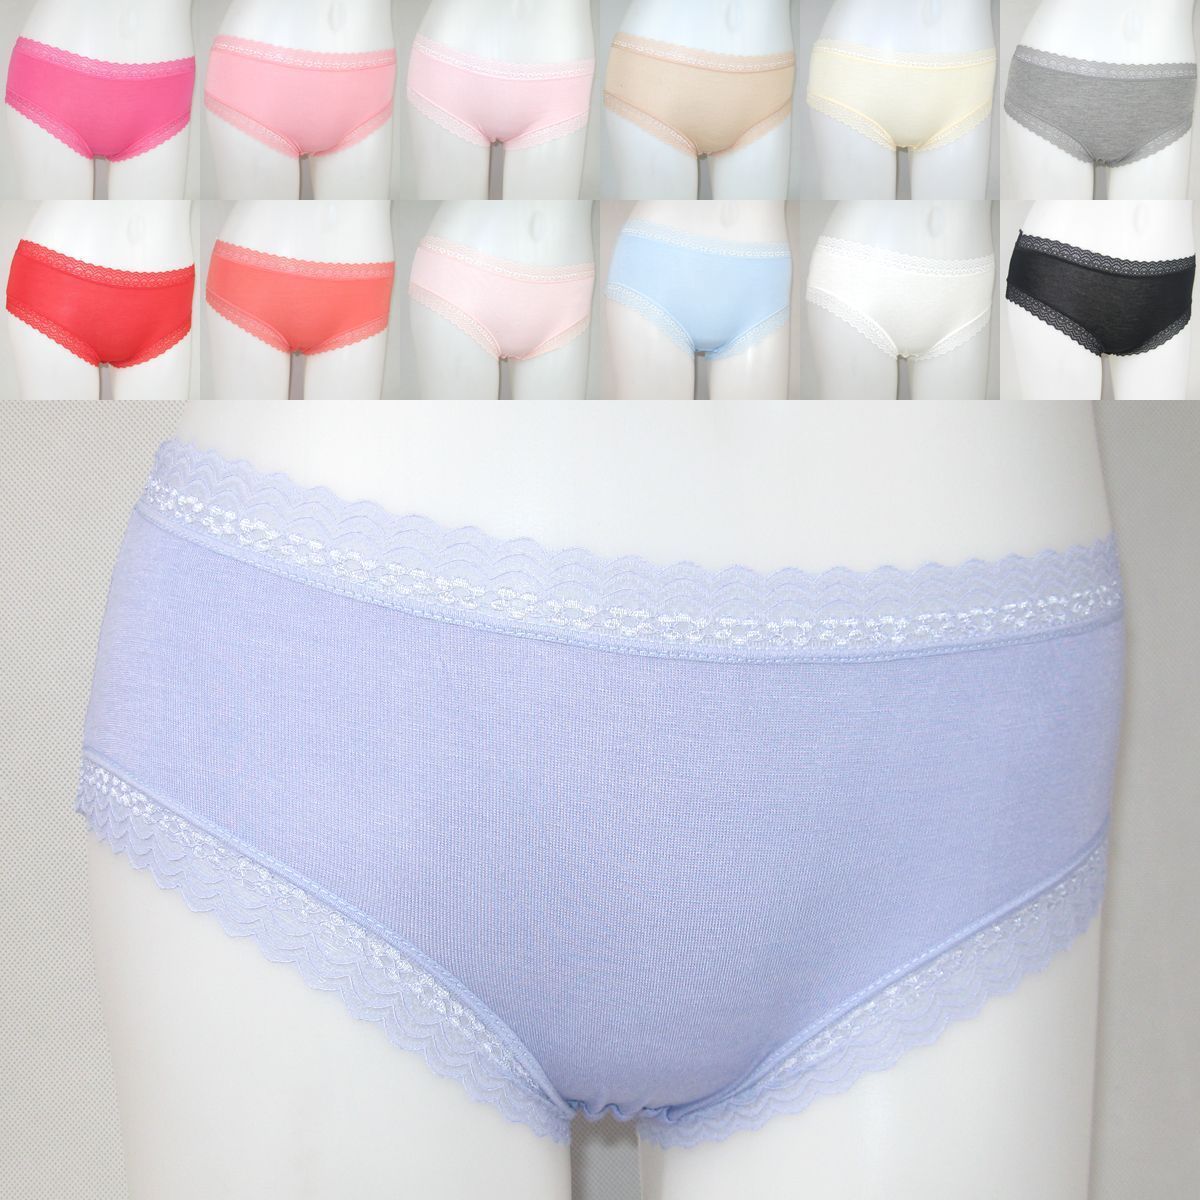 2013 43010 # package buttocks non - trace modal in the waist high stretch breathable modal ladies comfortable underwear